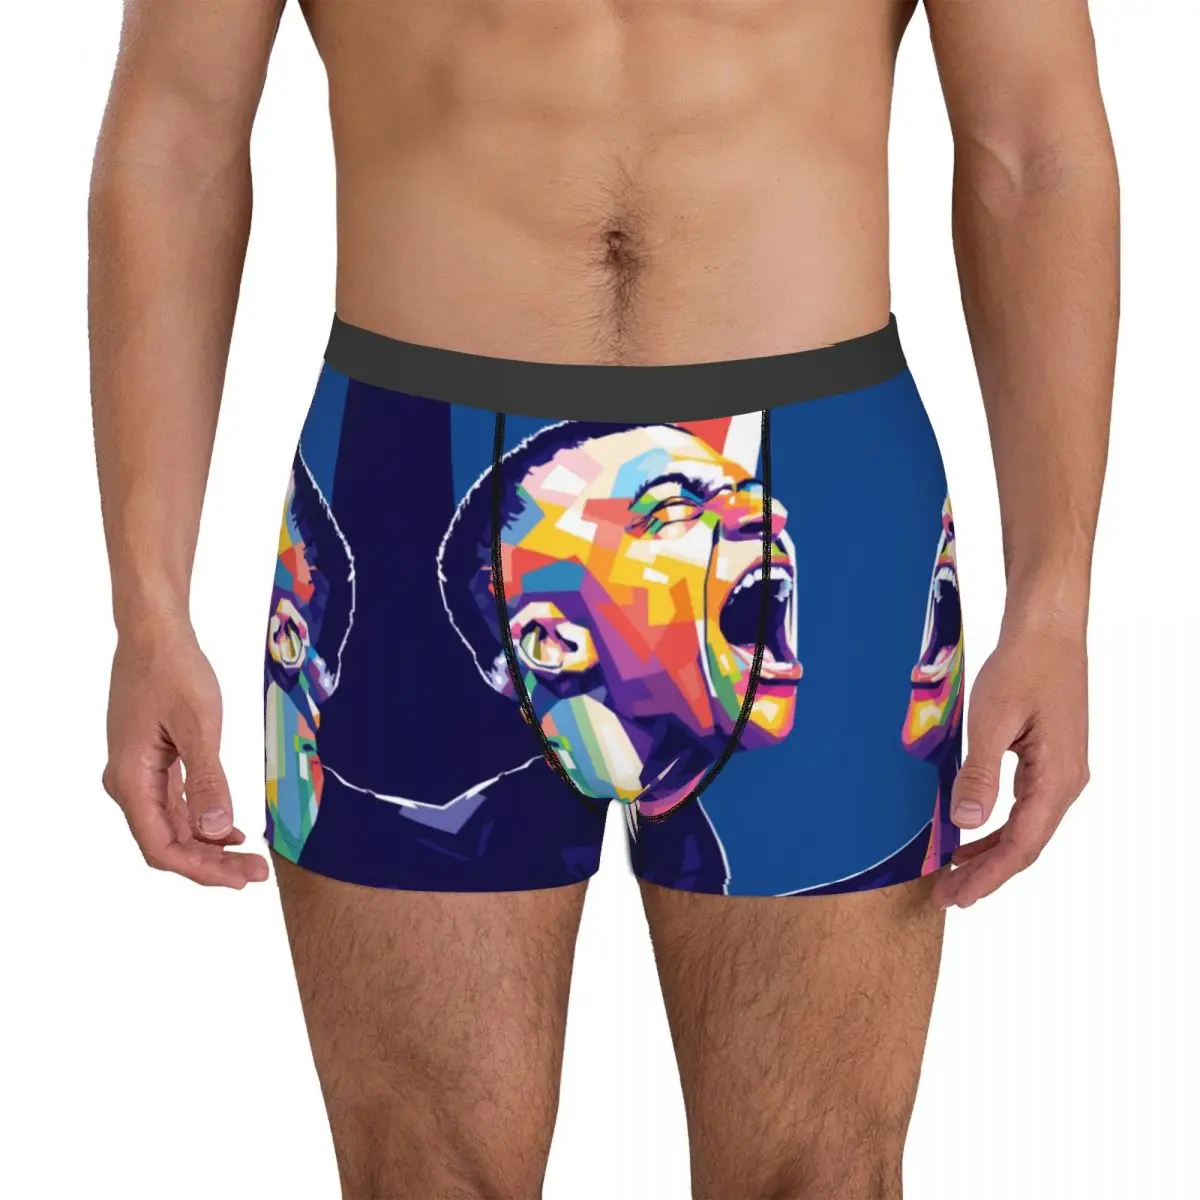 

Men's Boxer Briefs France Kylianer And Mbappﾩ And Mbappe Exotic Underclothes Football Player Novelty Four Seasons Wearable